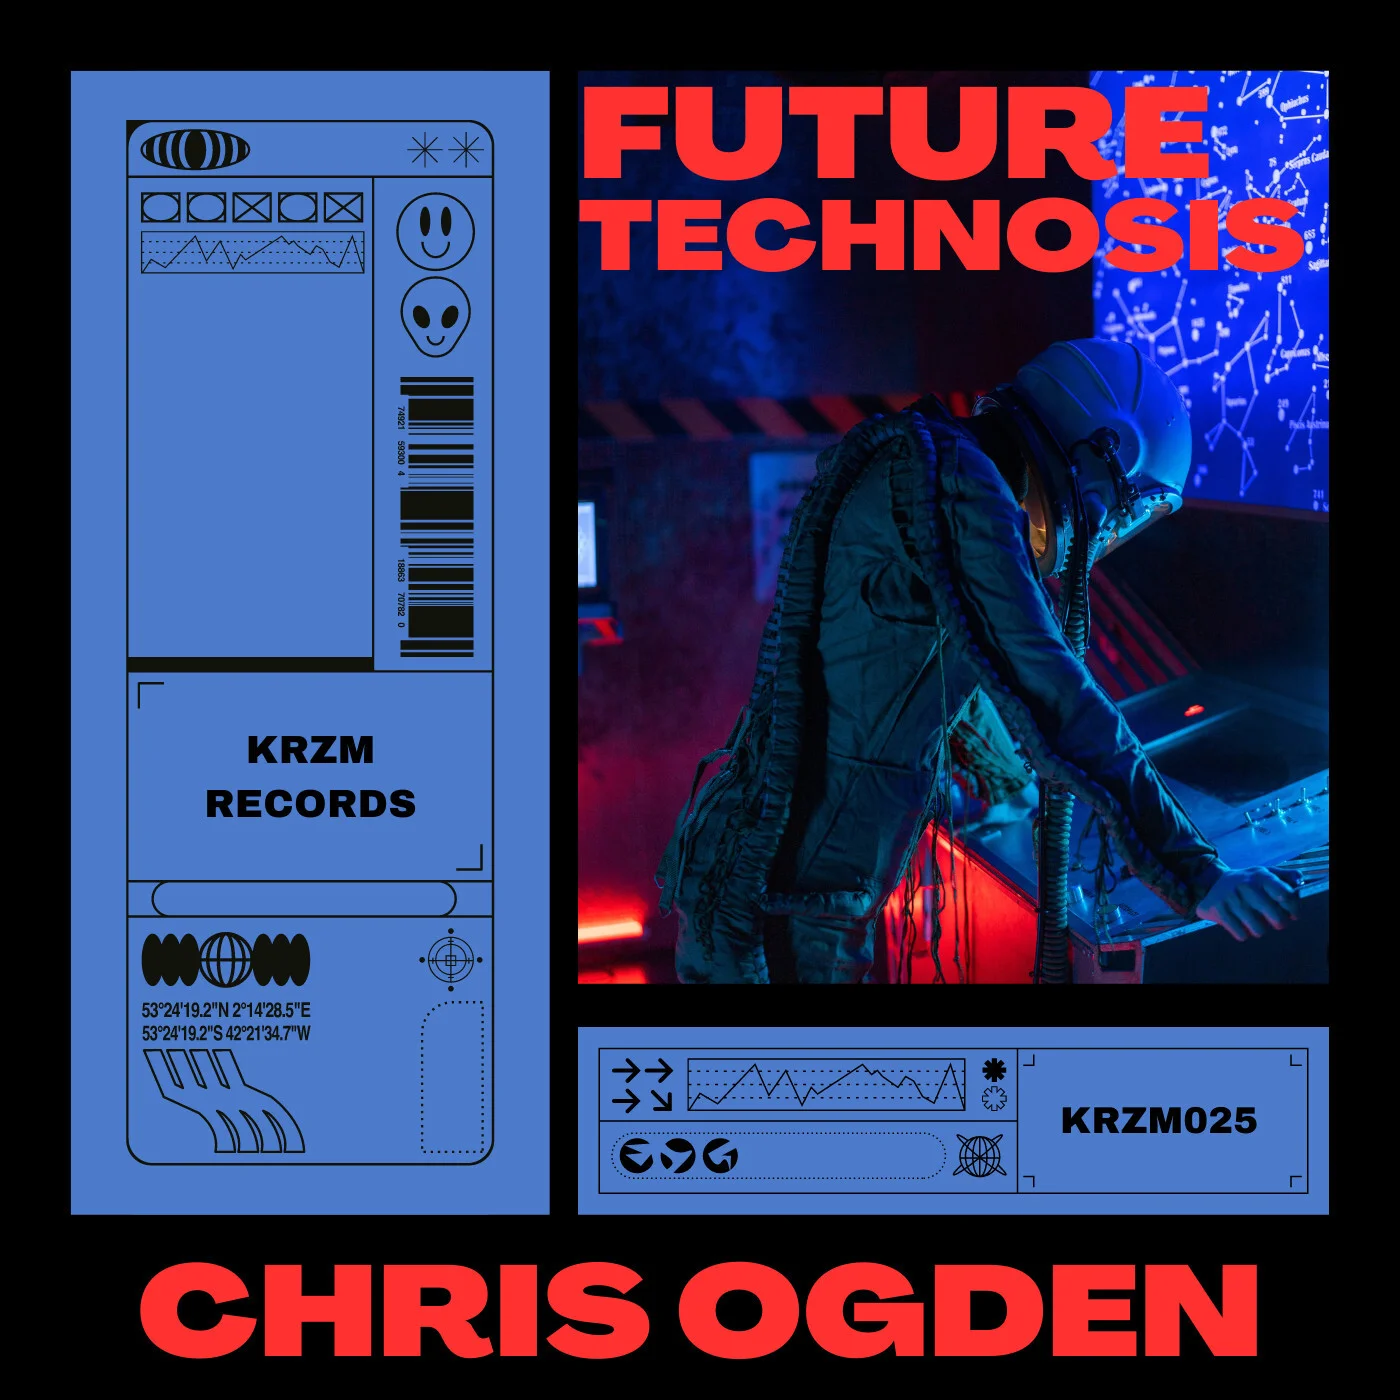 Chris Ogden's "Future Technosis EP" is now available on KRZM Records